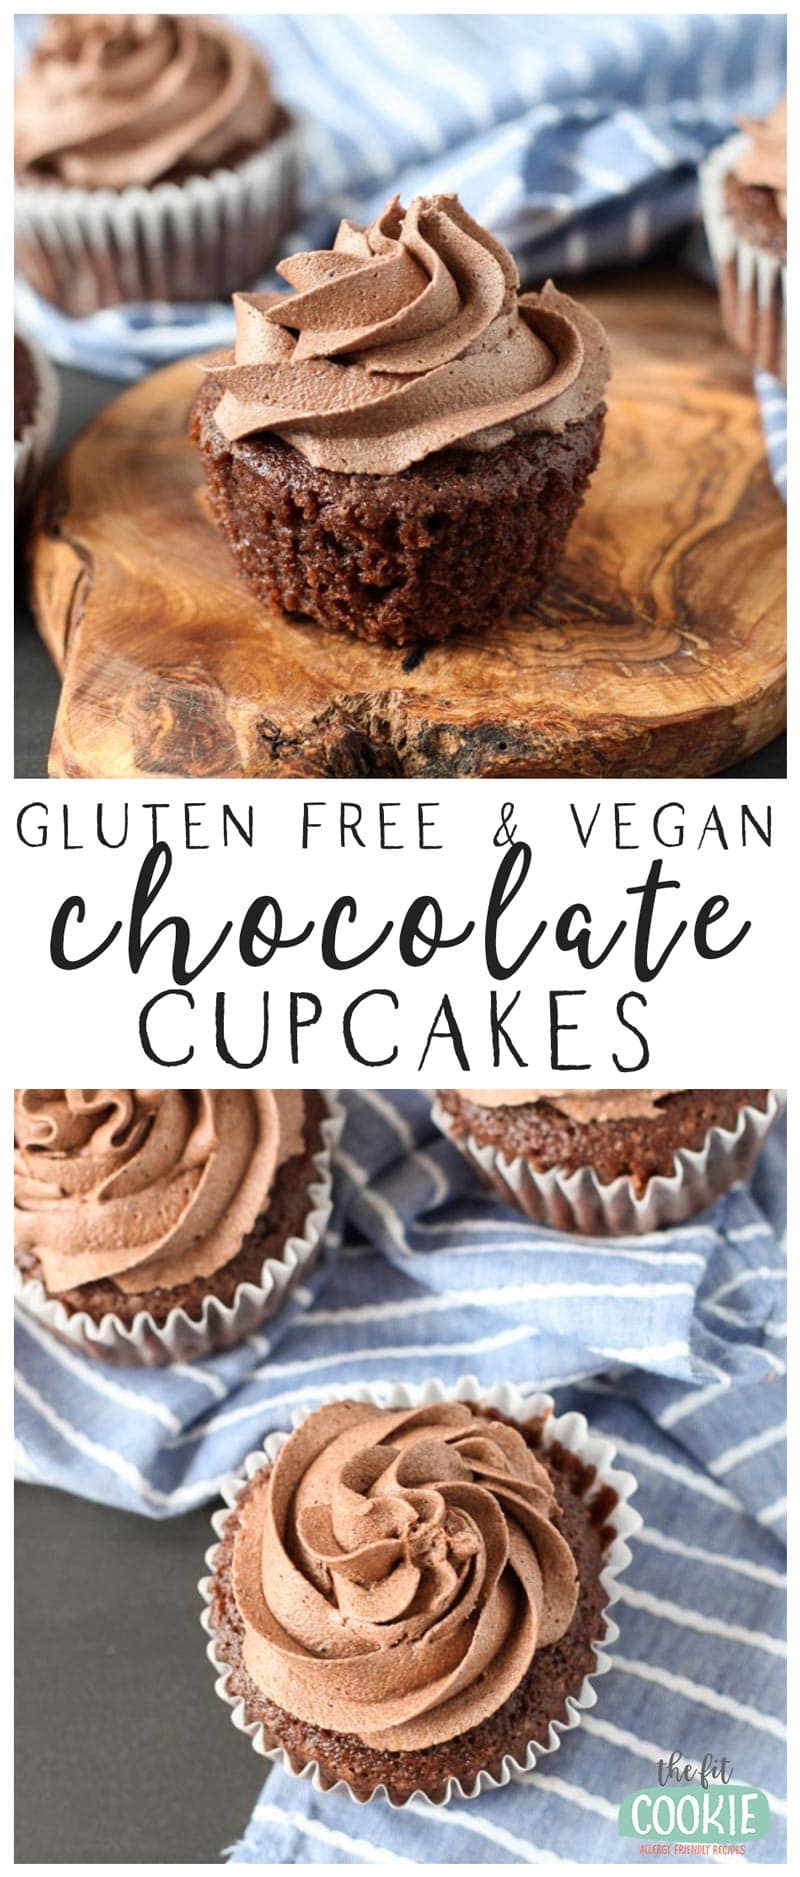 collage image of gluten free chocolate cupcakes on a wood board